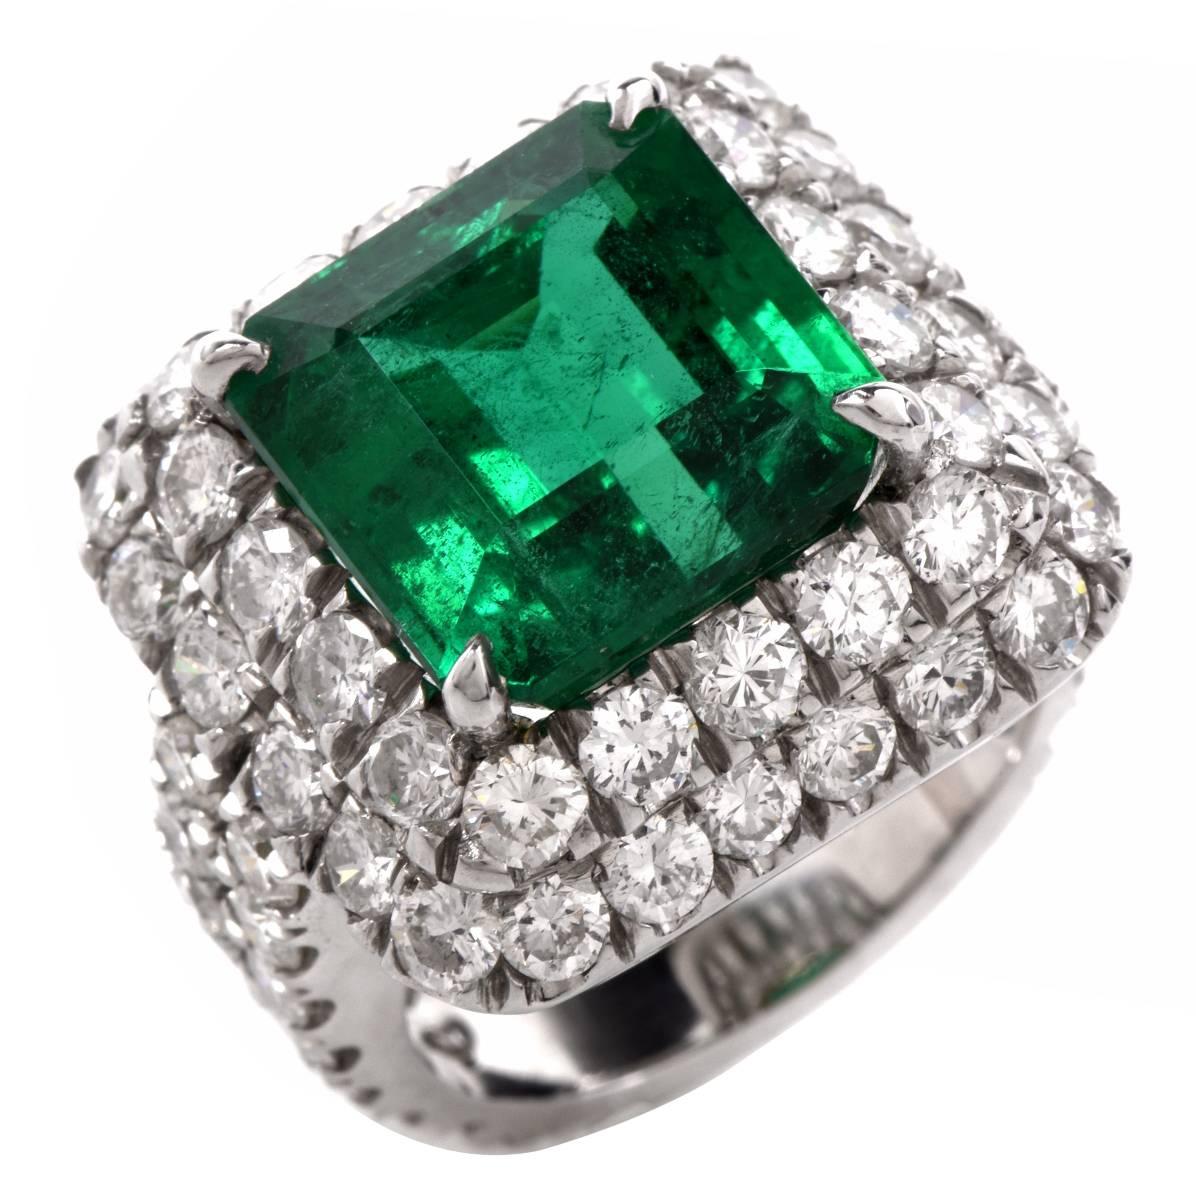 Exceptional 13.67cts Emerald and Diamond Platinum Cocktail Ring For Sale